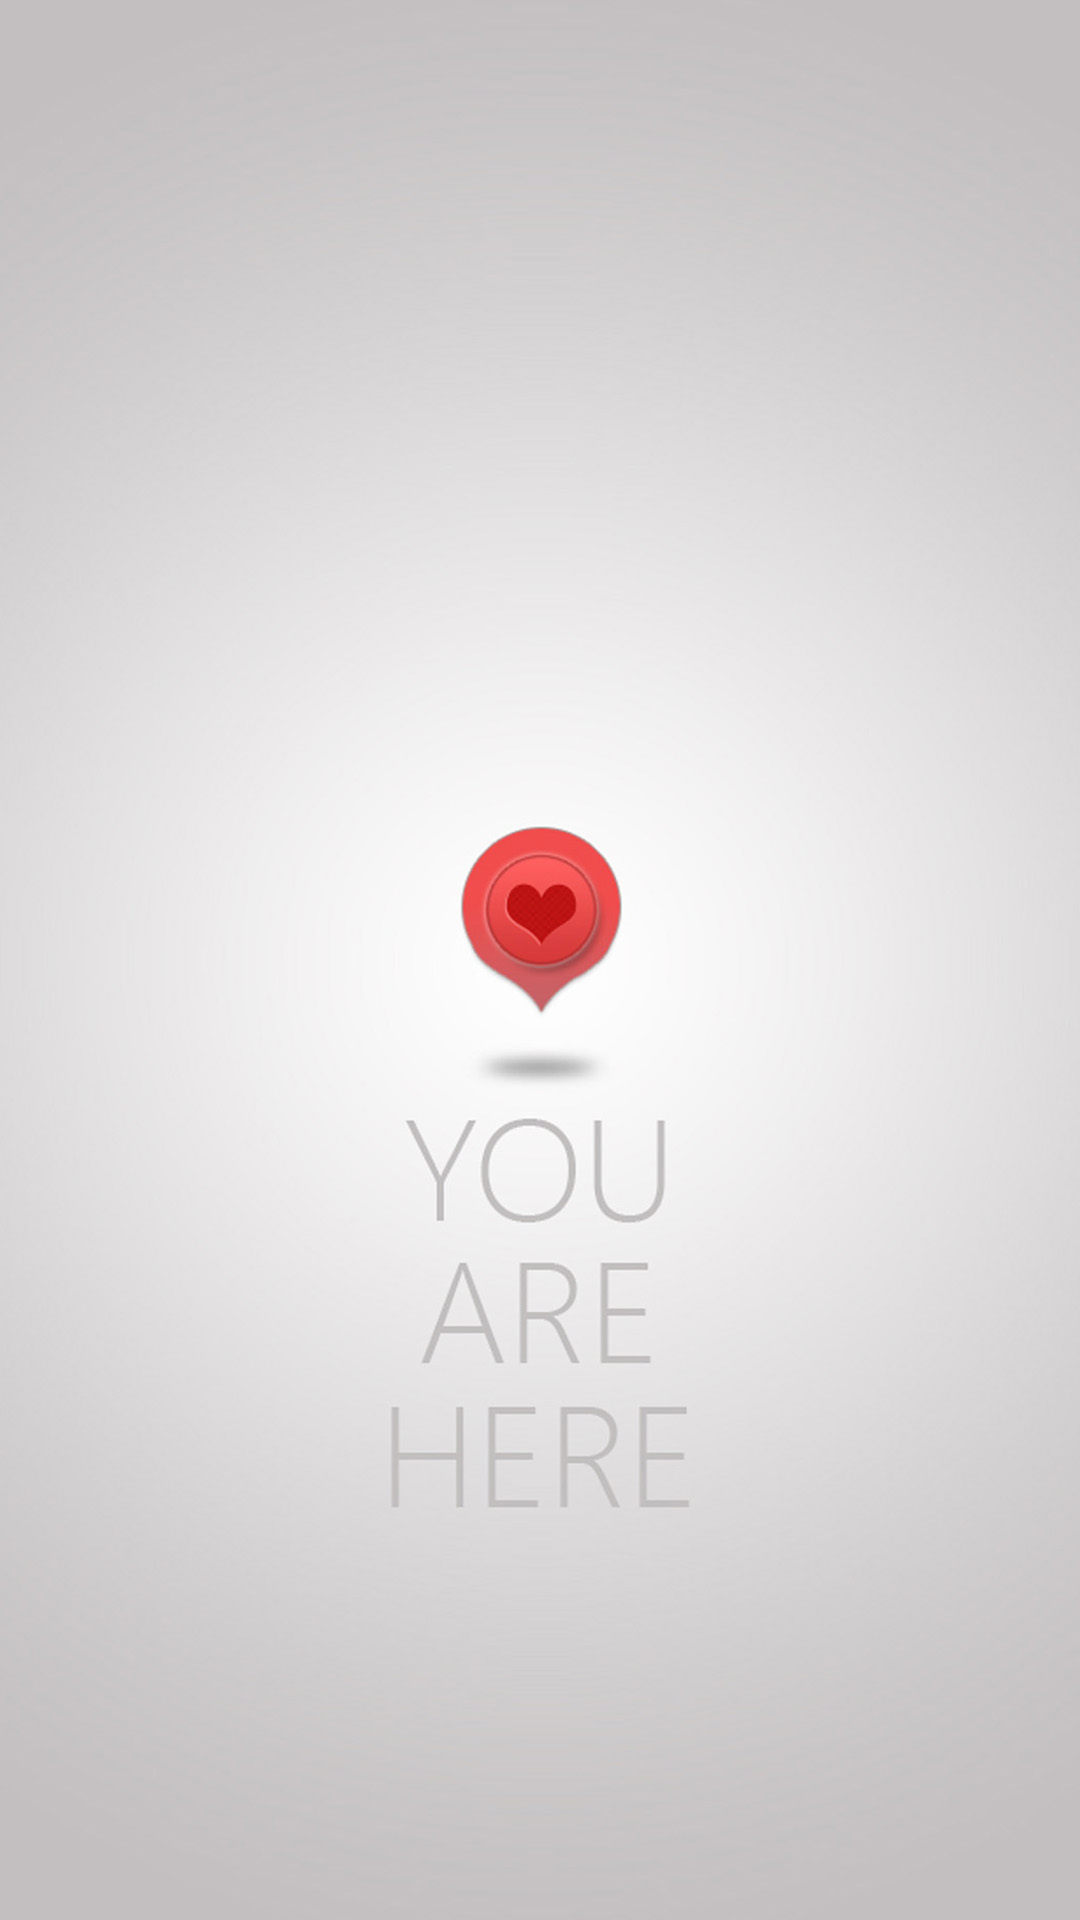 You Are Here Loveメッセージiphone6s壁紙 Iphone Wallpapers